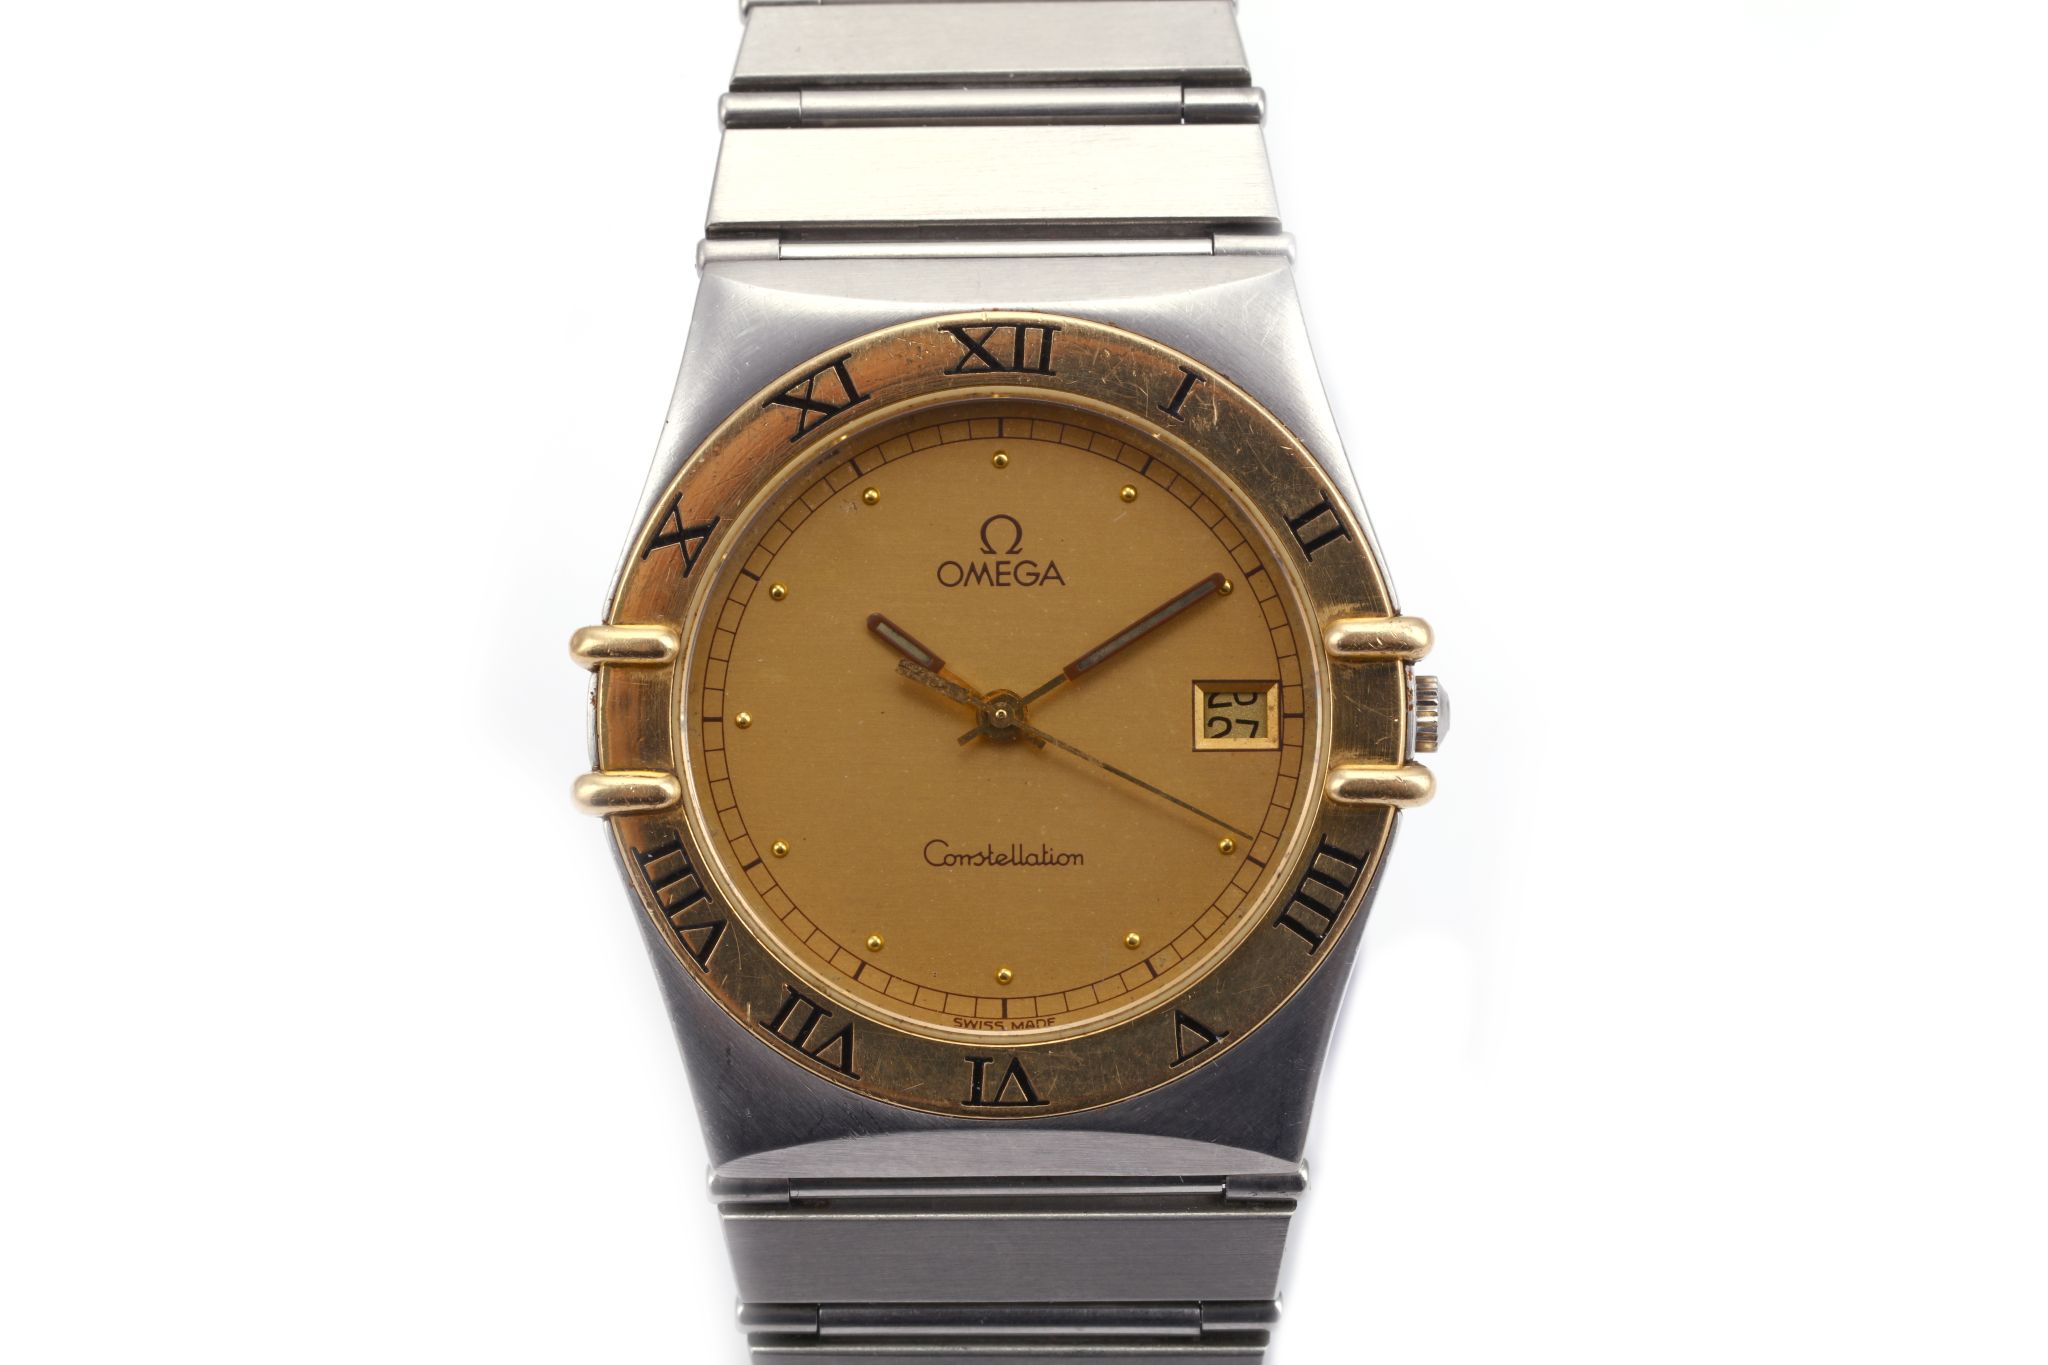 OMEGA CONSTELLATION WRISTWATCH  A Gents c.1990 stainless steel and 18ct Gold Omega - Constellation - Image 2 of 4